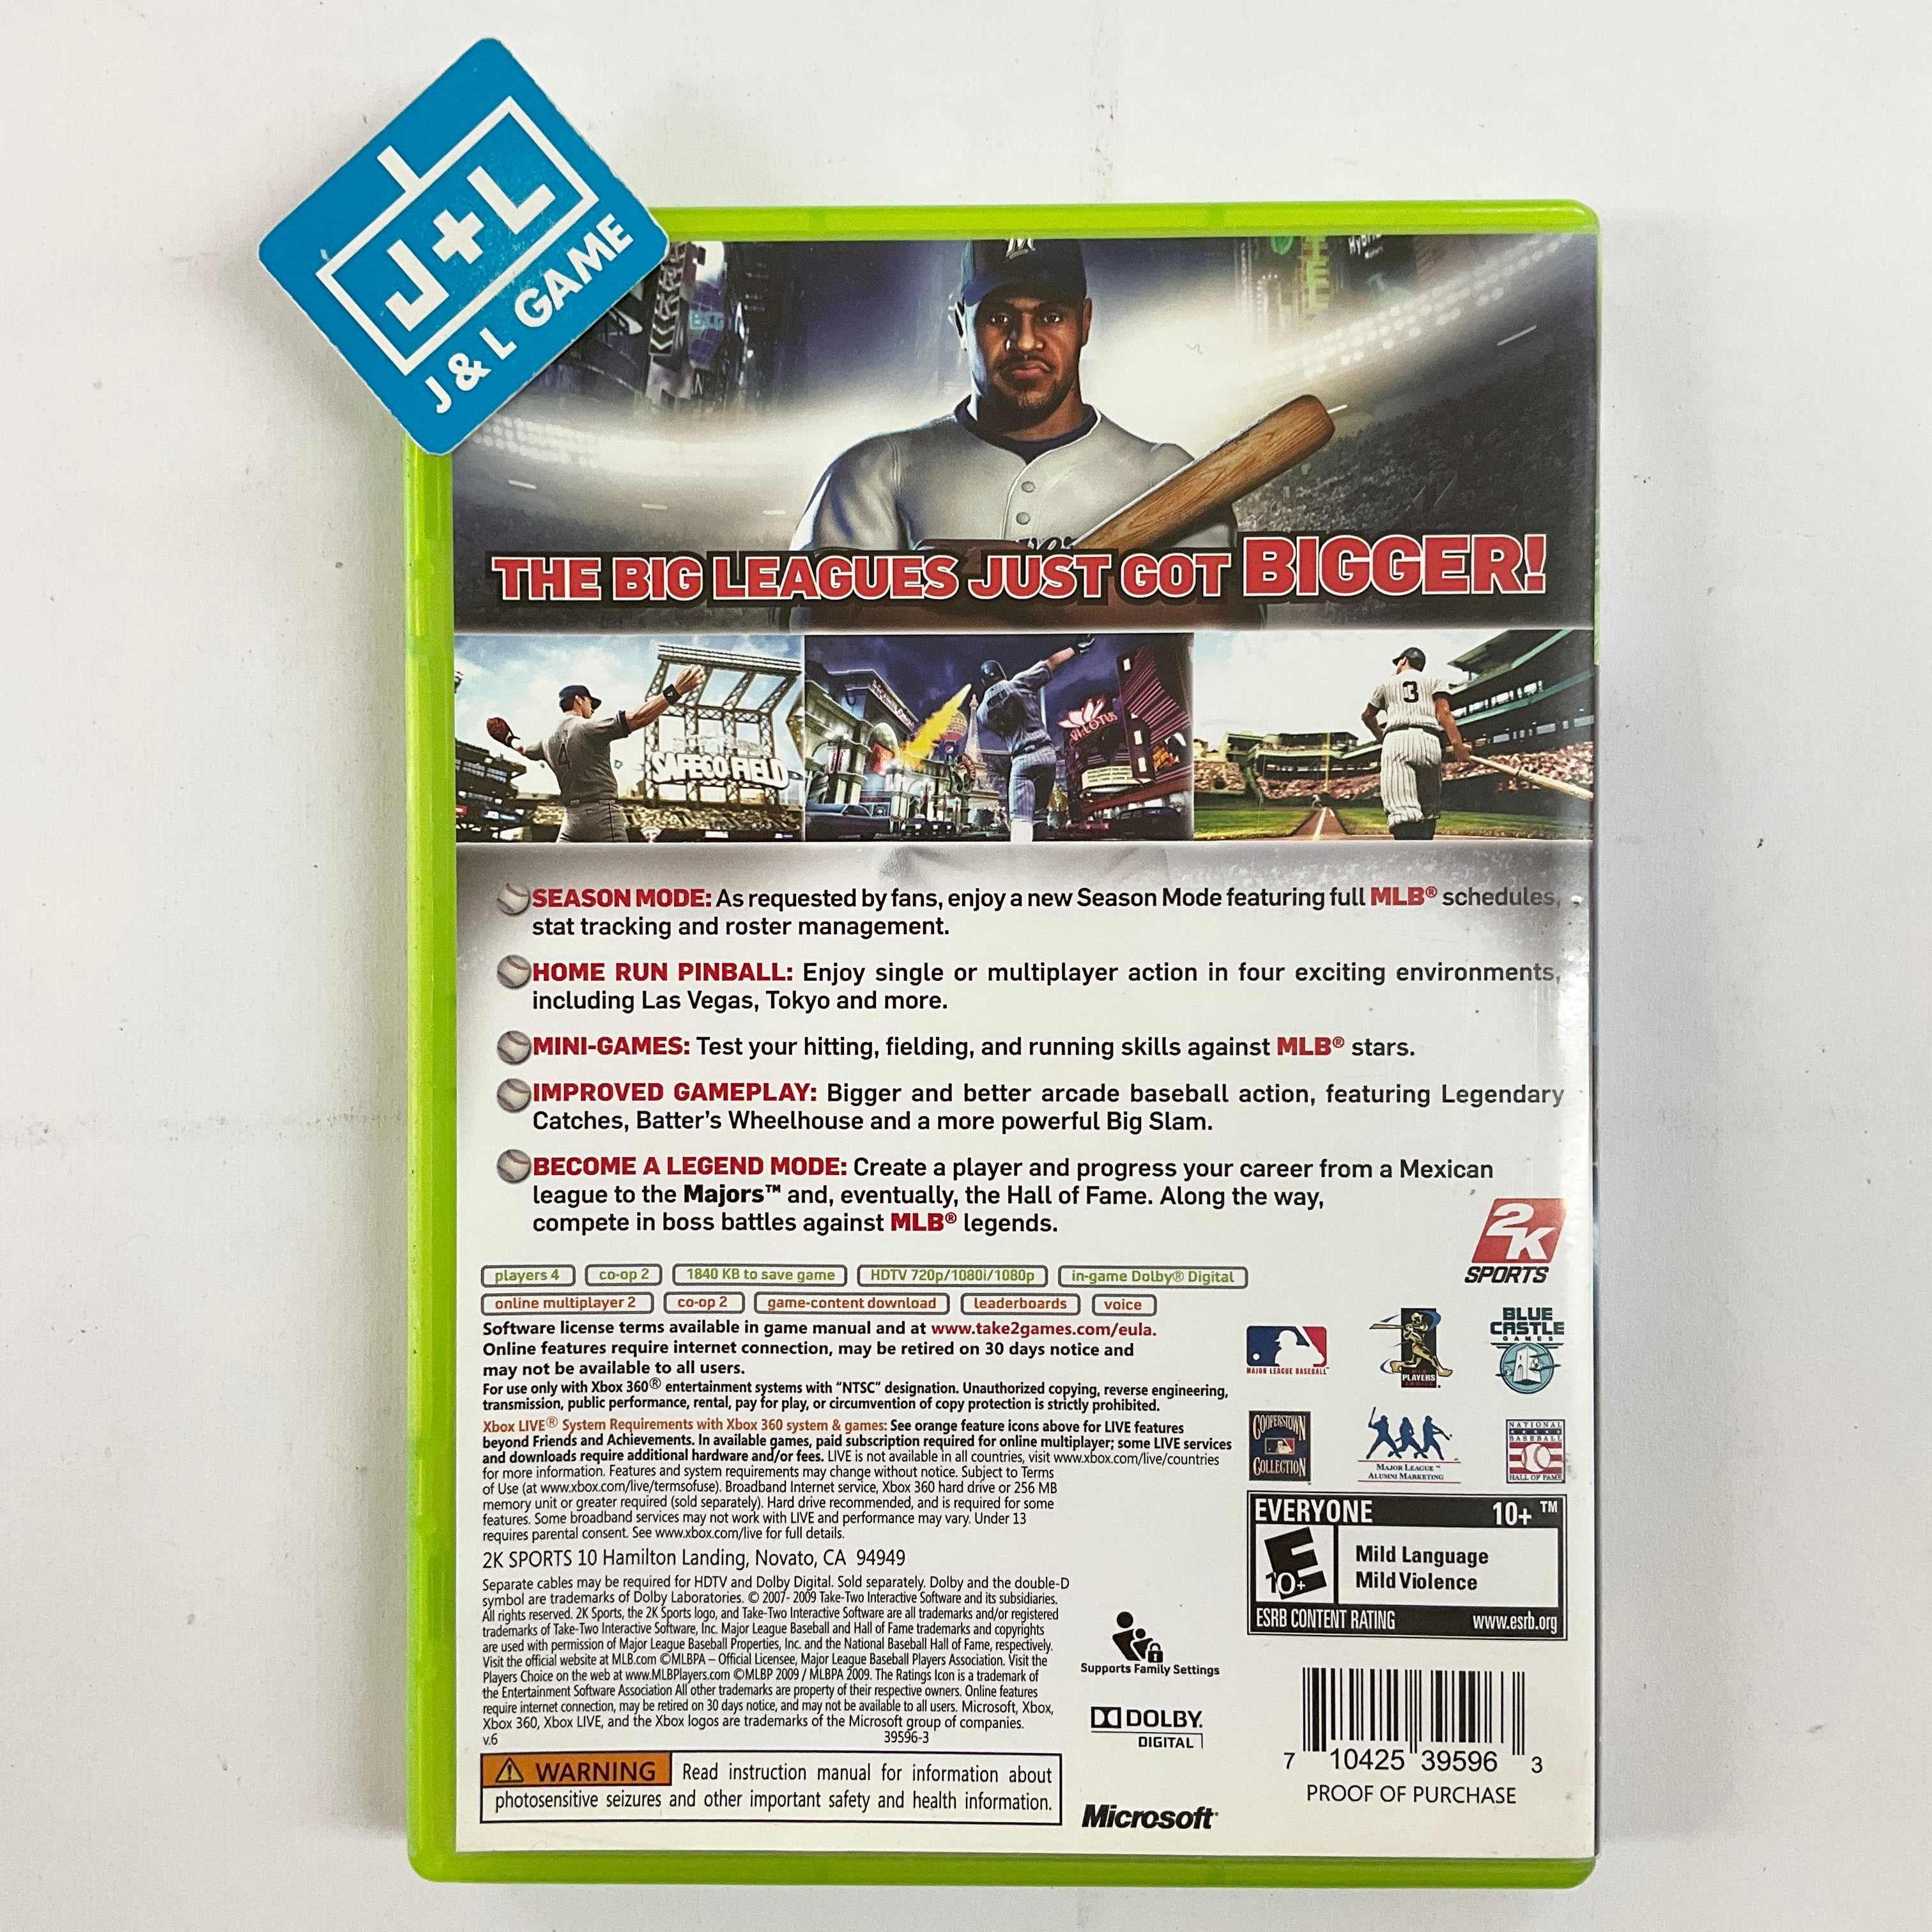 The Bigs 2 - Xbox 360 [Pre-Owned] Video Games 2K Sports   